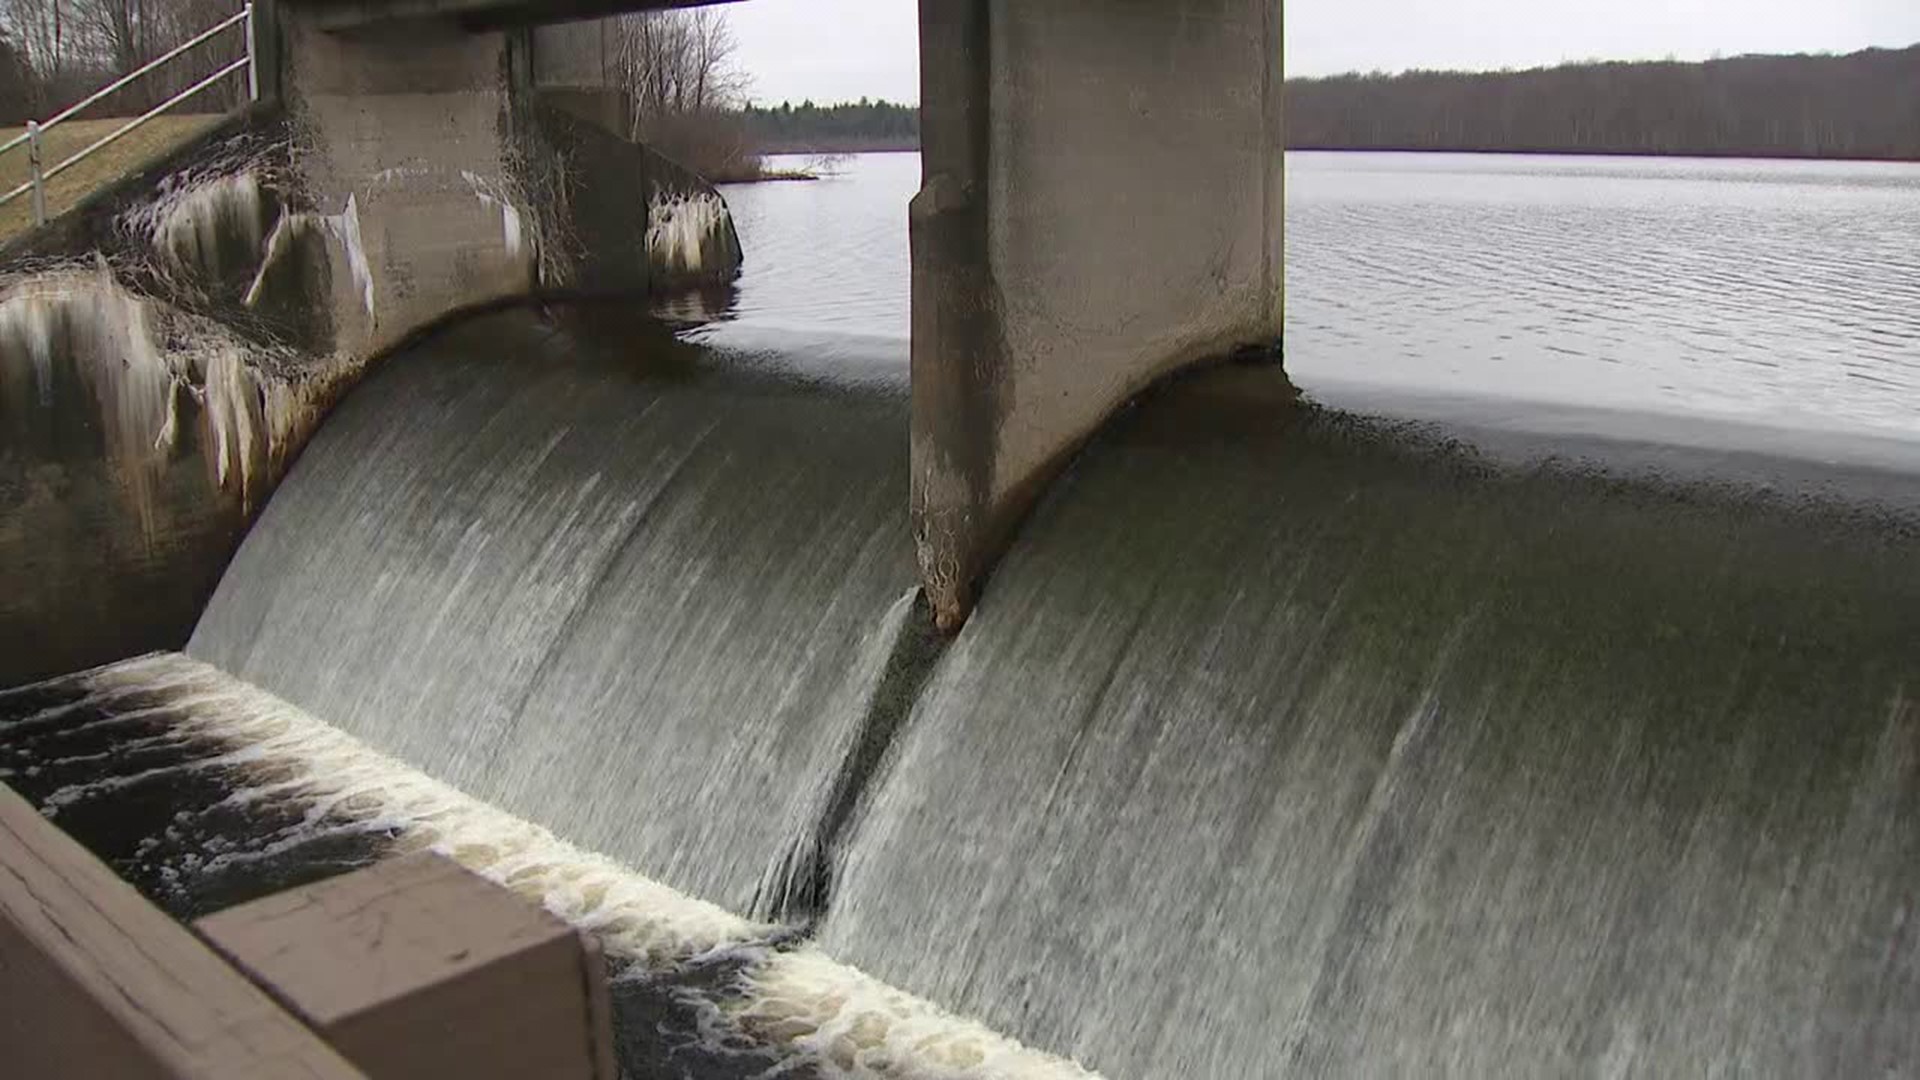 Newswatch 16's Emily Kress shares the plans for a dam replacement project and the impact it will have on visitors in Monroe County.